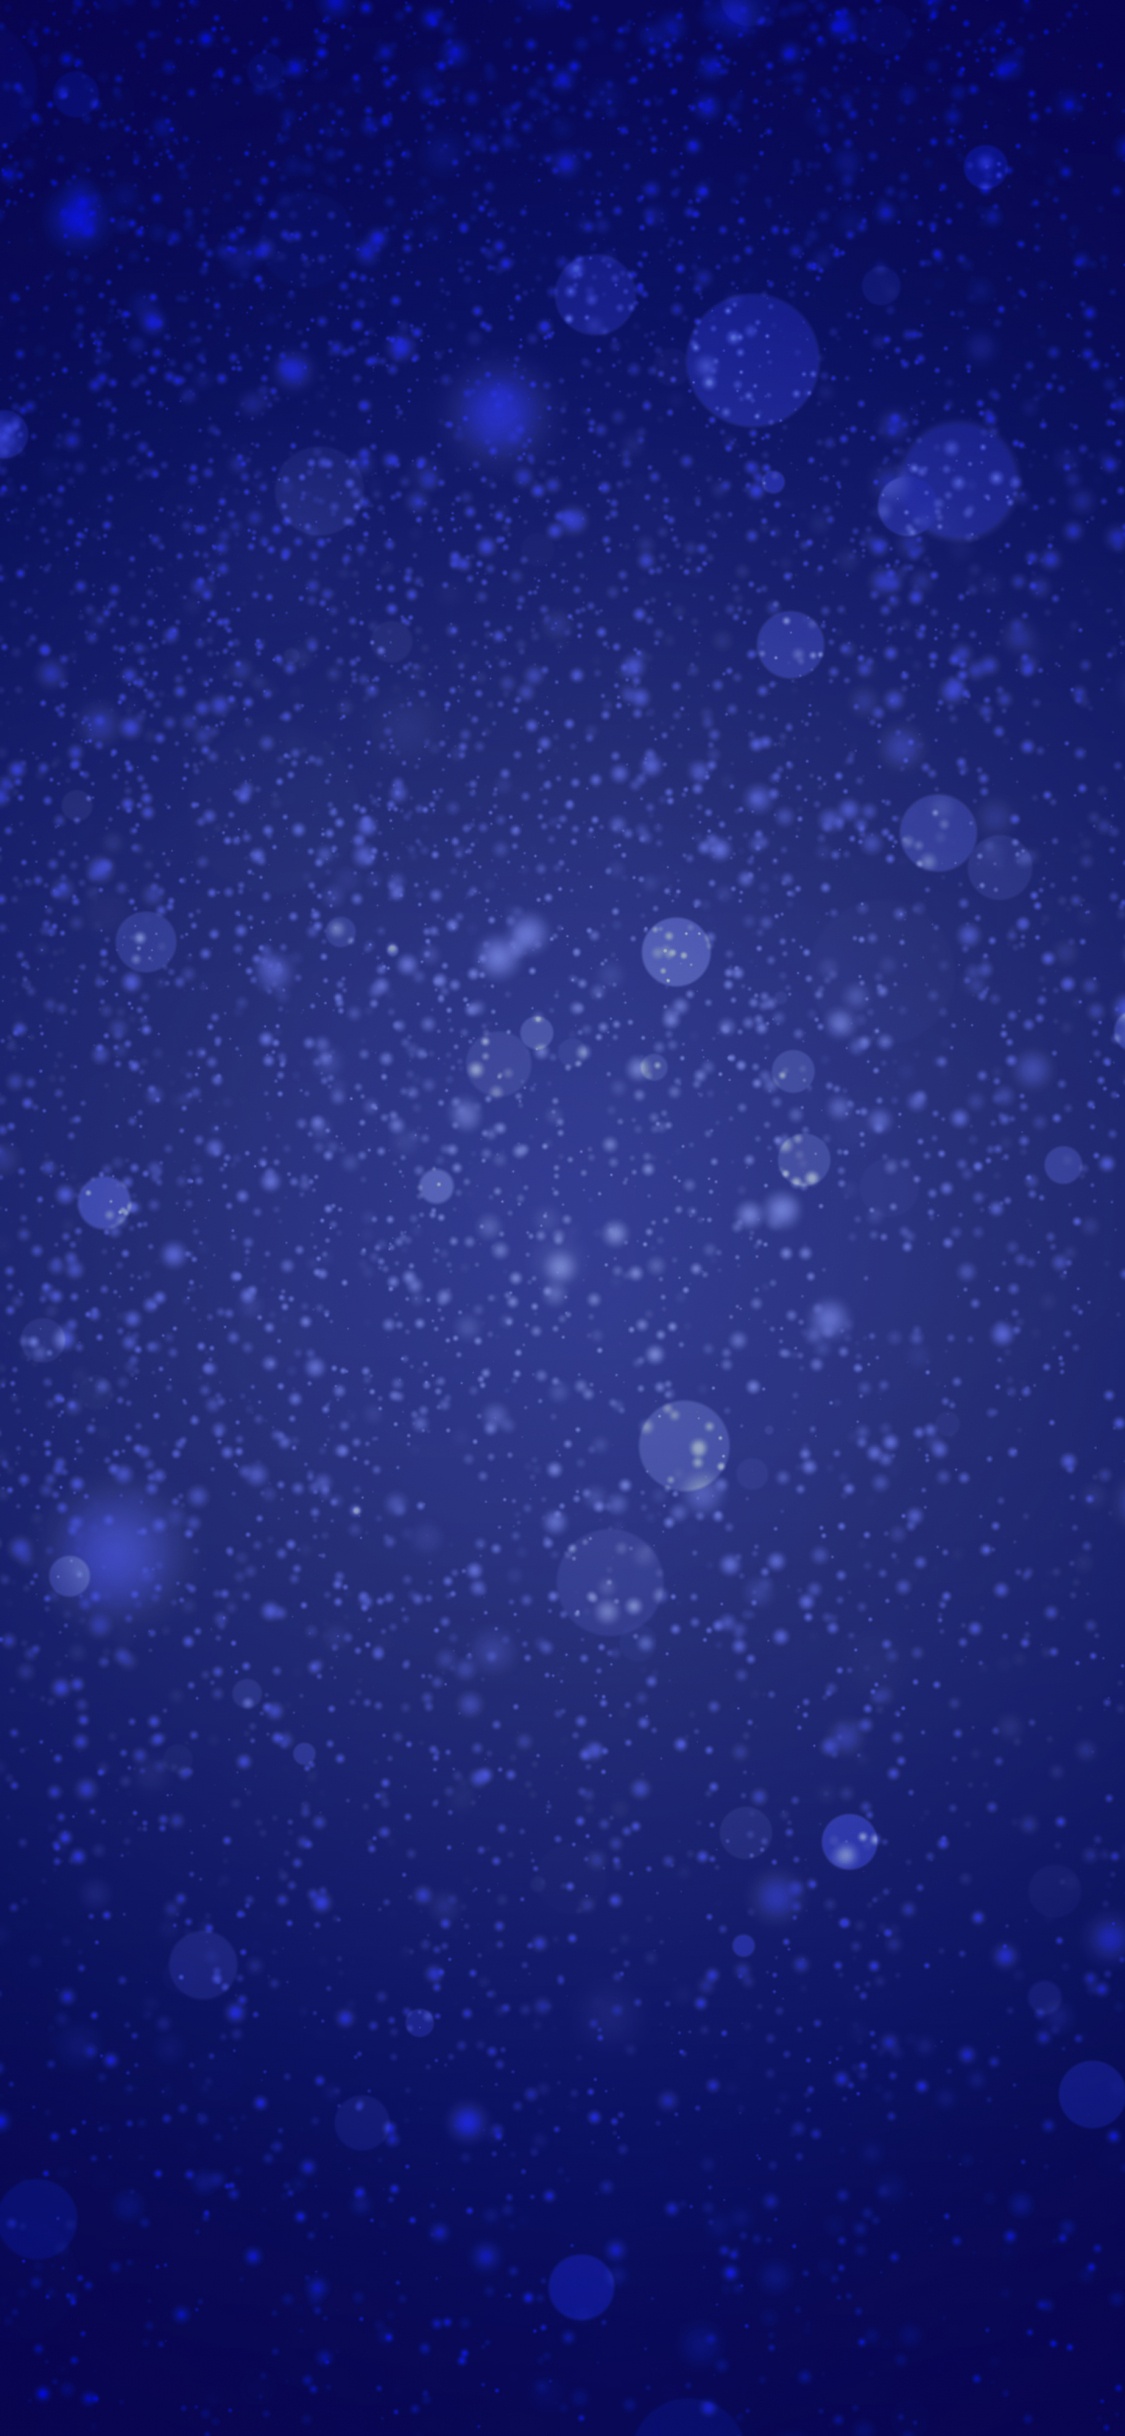 Blue and White Galaxy Illustration. Wallpaper in 1125x2436 Resolution